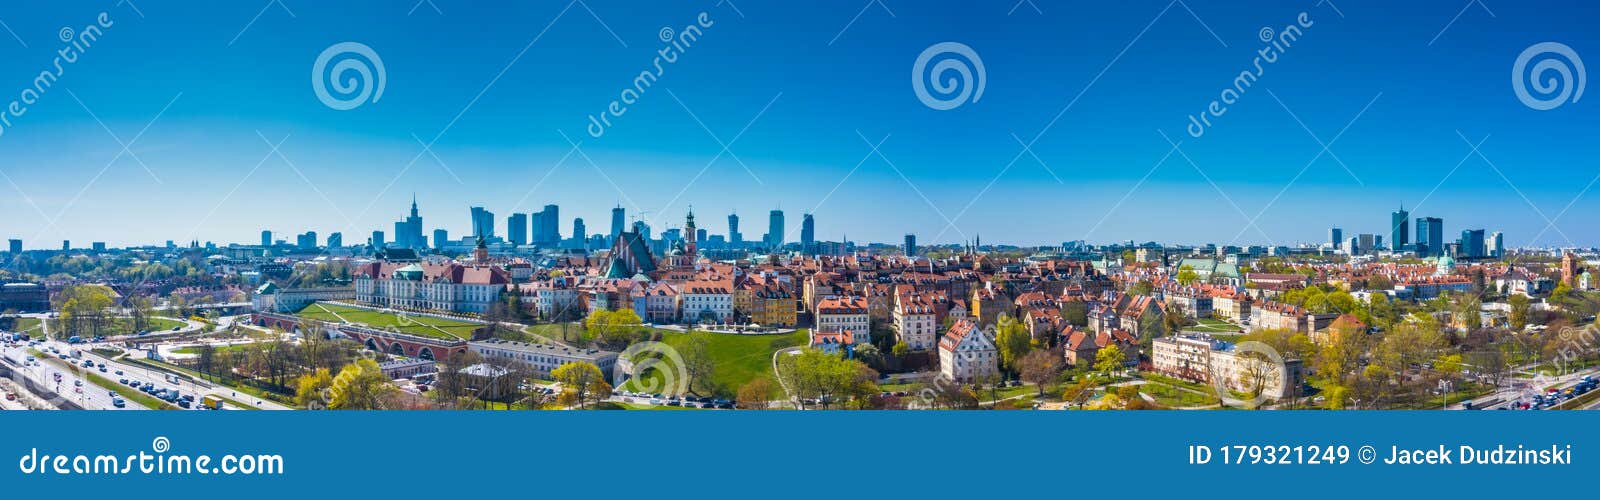 Historic Cityscape Panorama with High Angle View of Colorful ...